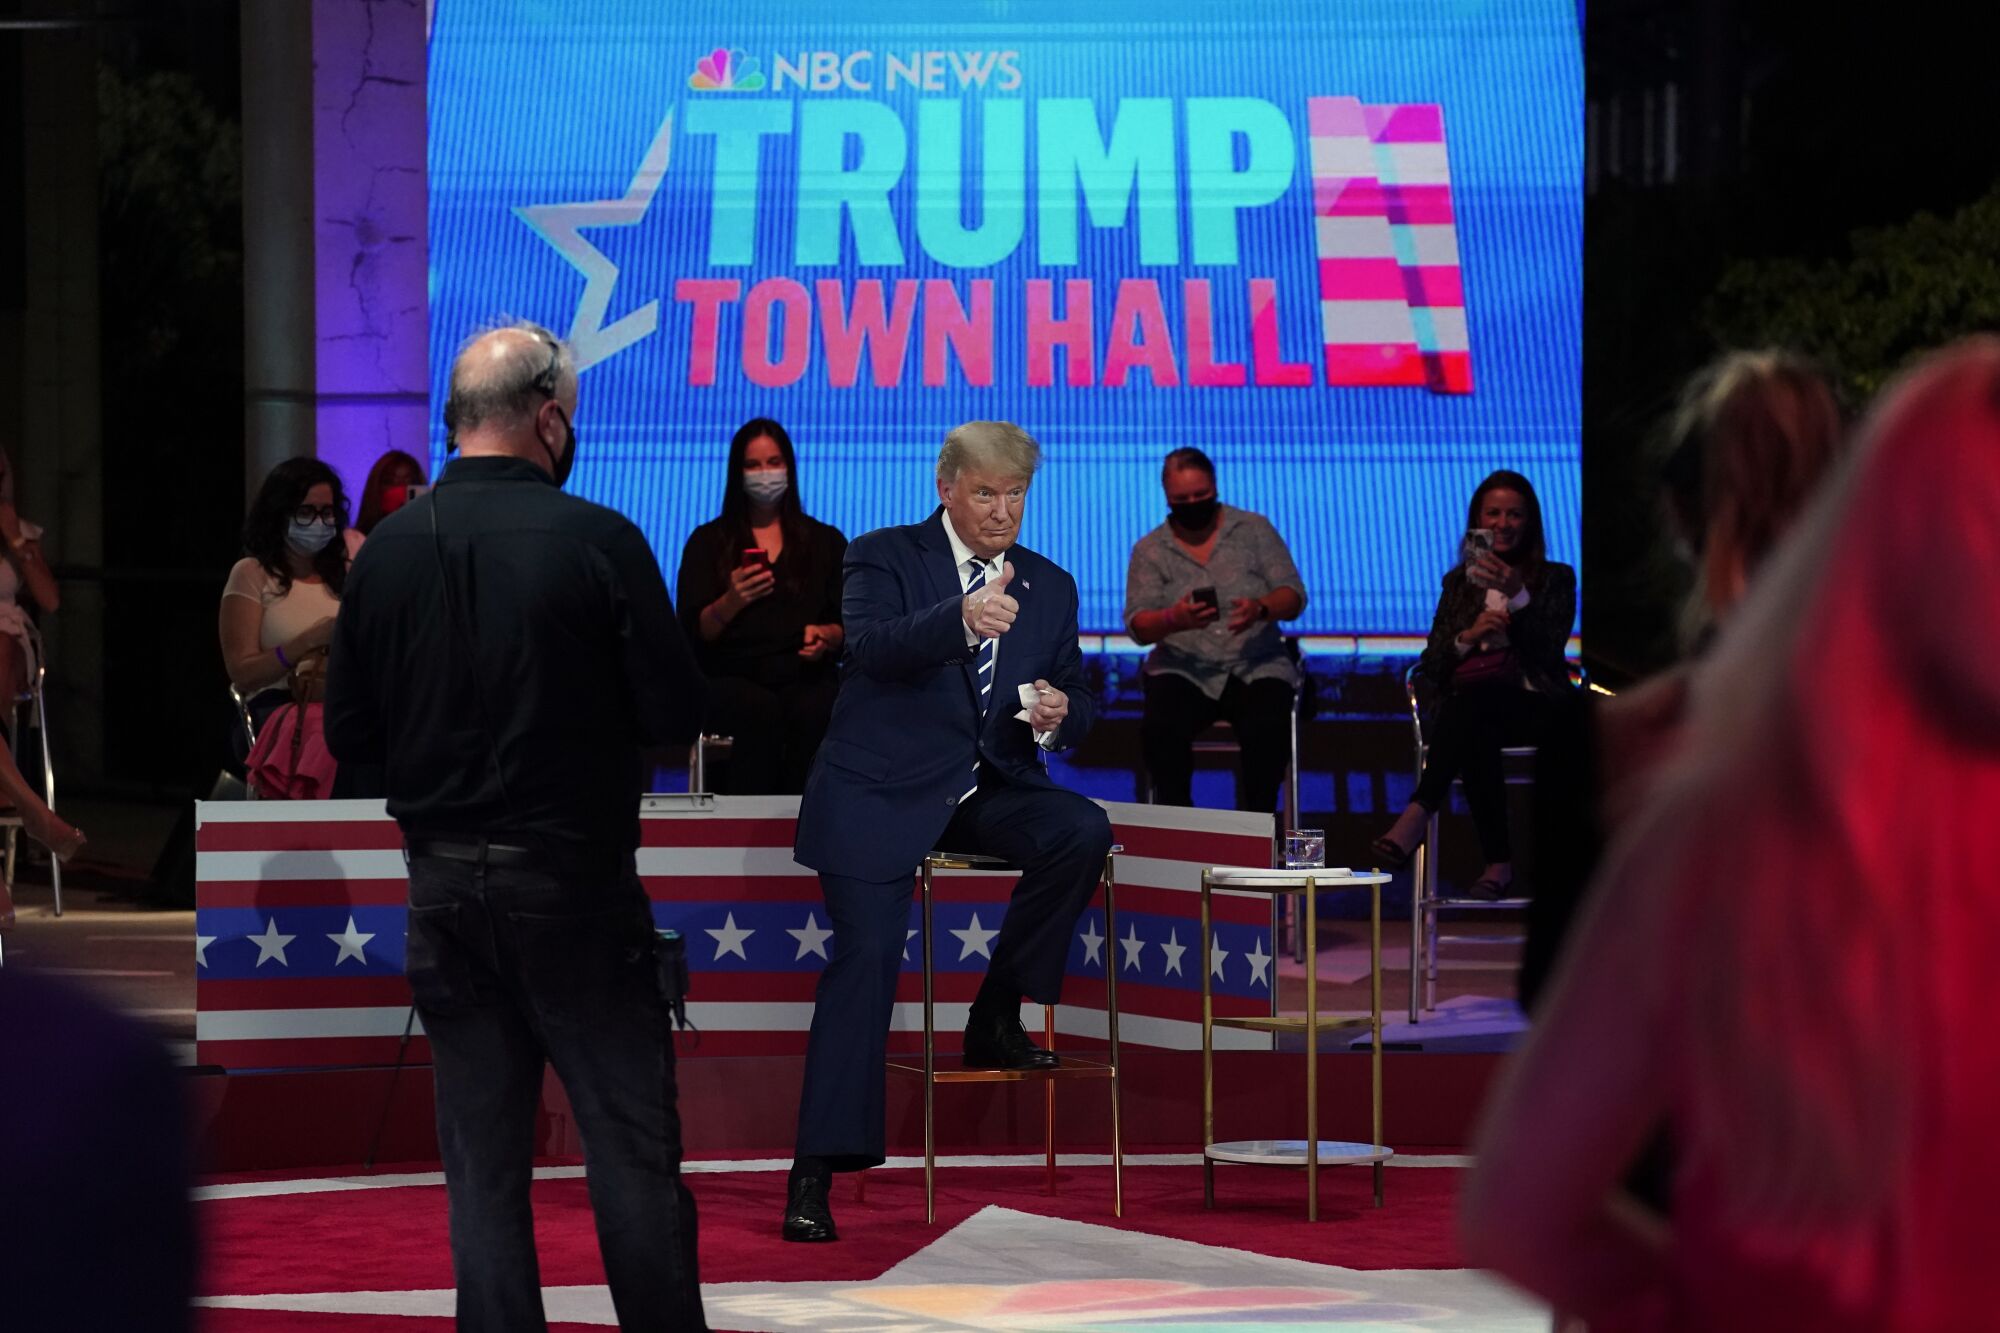 President Trump gives a thumbs up on stage in front of a wall that says NBC News Trump town hall